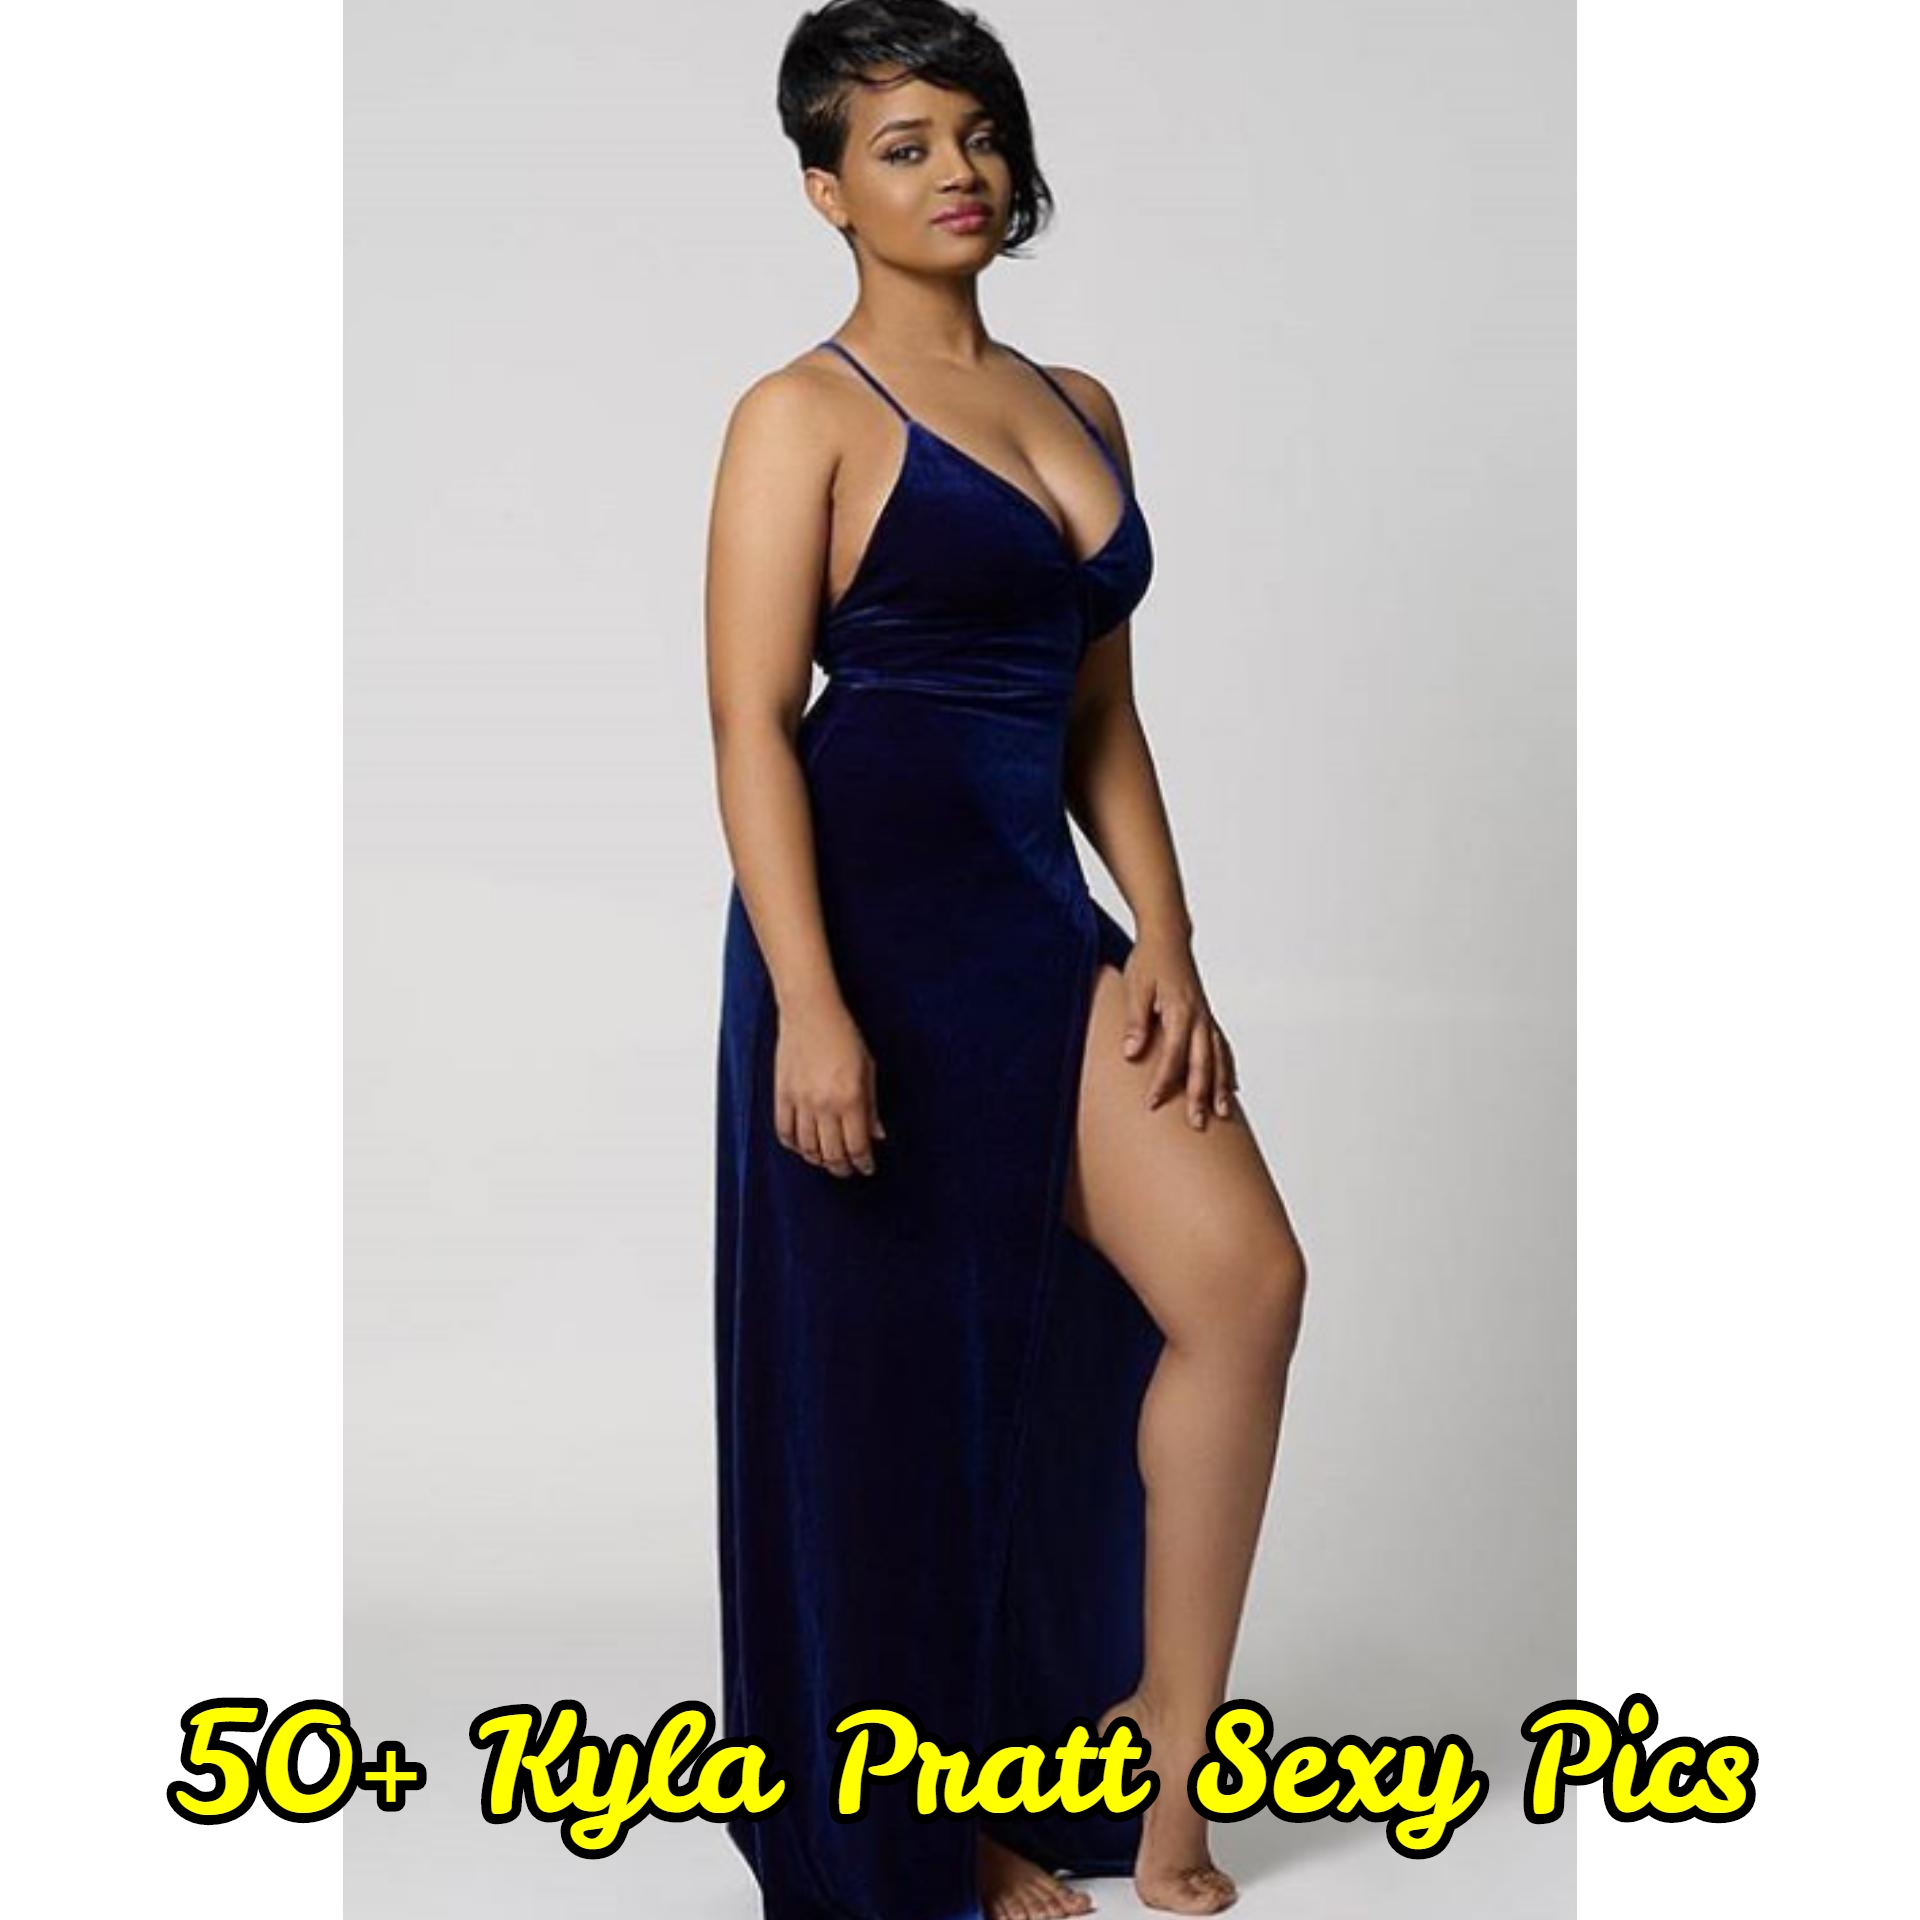 51 Hot Pictures Of Kyla Pratt Which Will Make You Swelter All Over 3